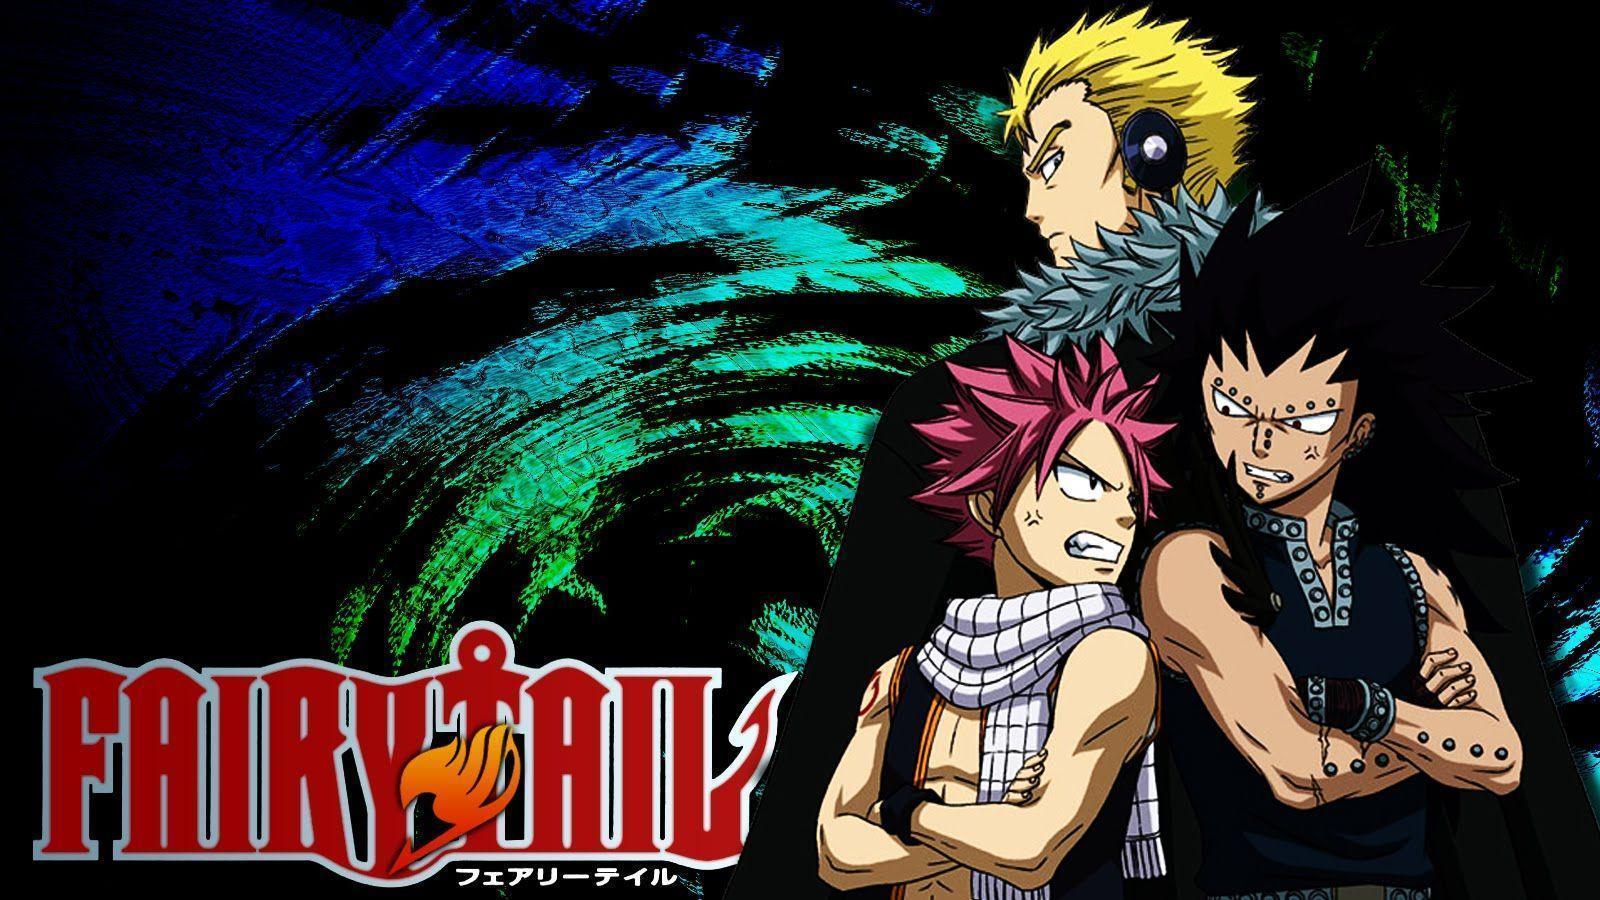 LEVIATHAN TAIL. We Talk About FAIRY TAIL